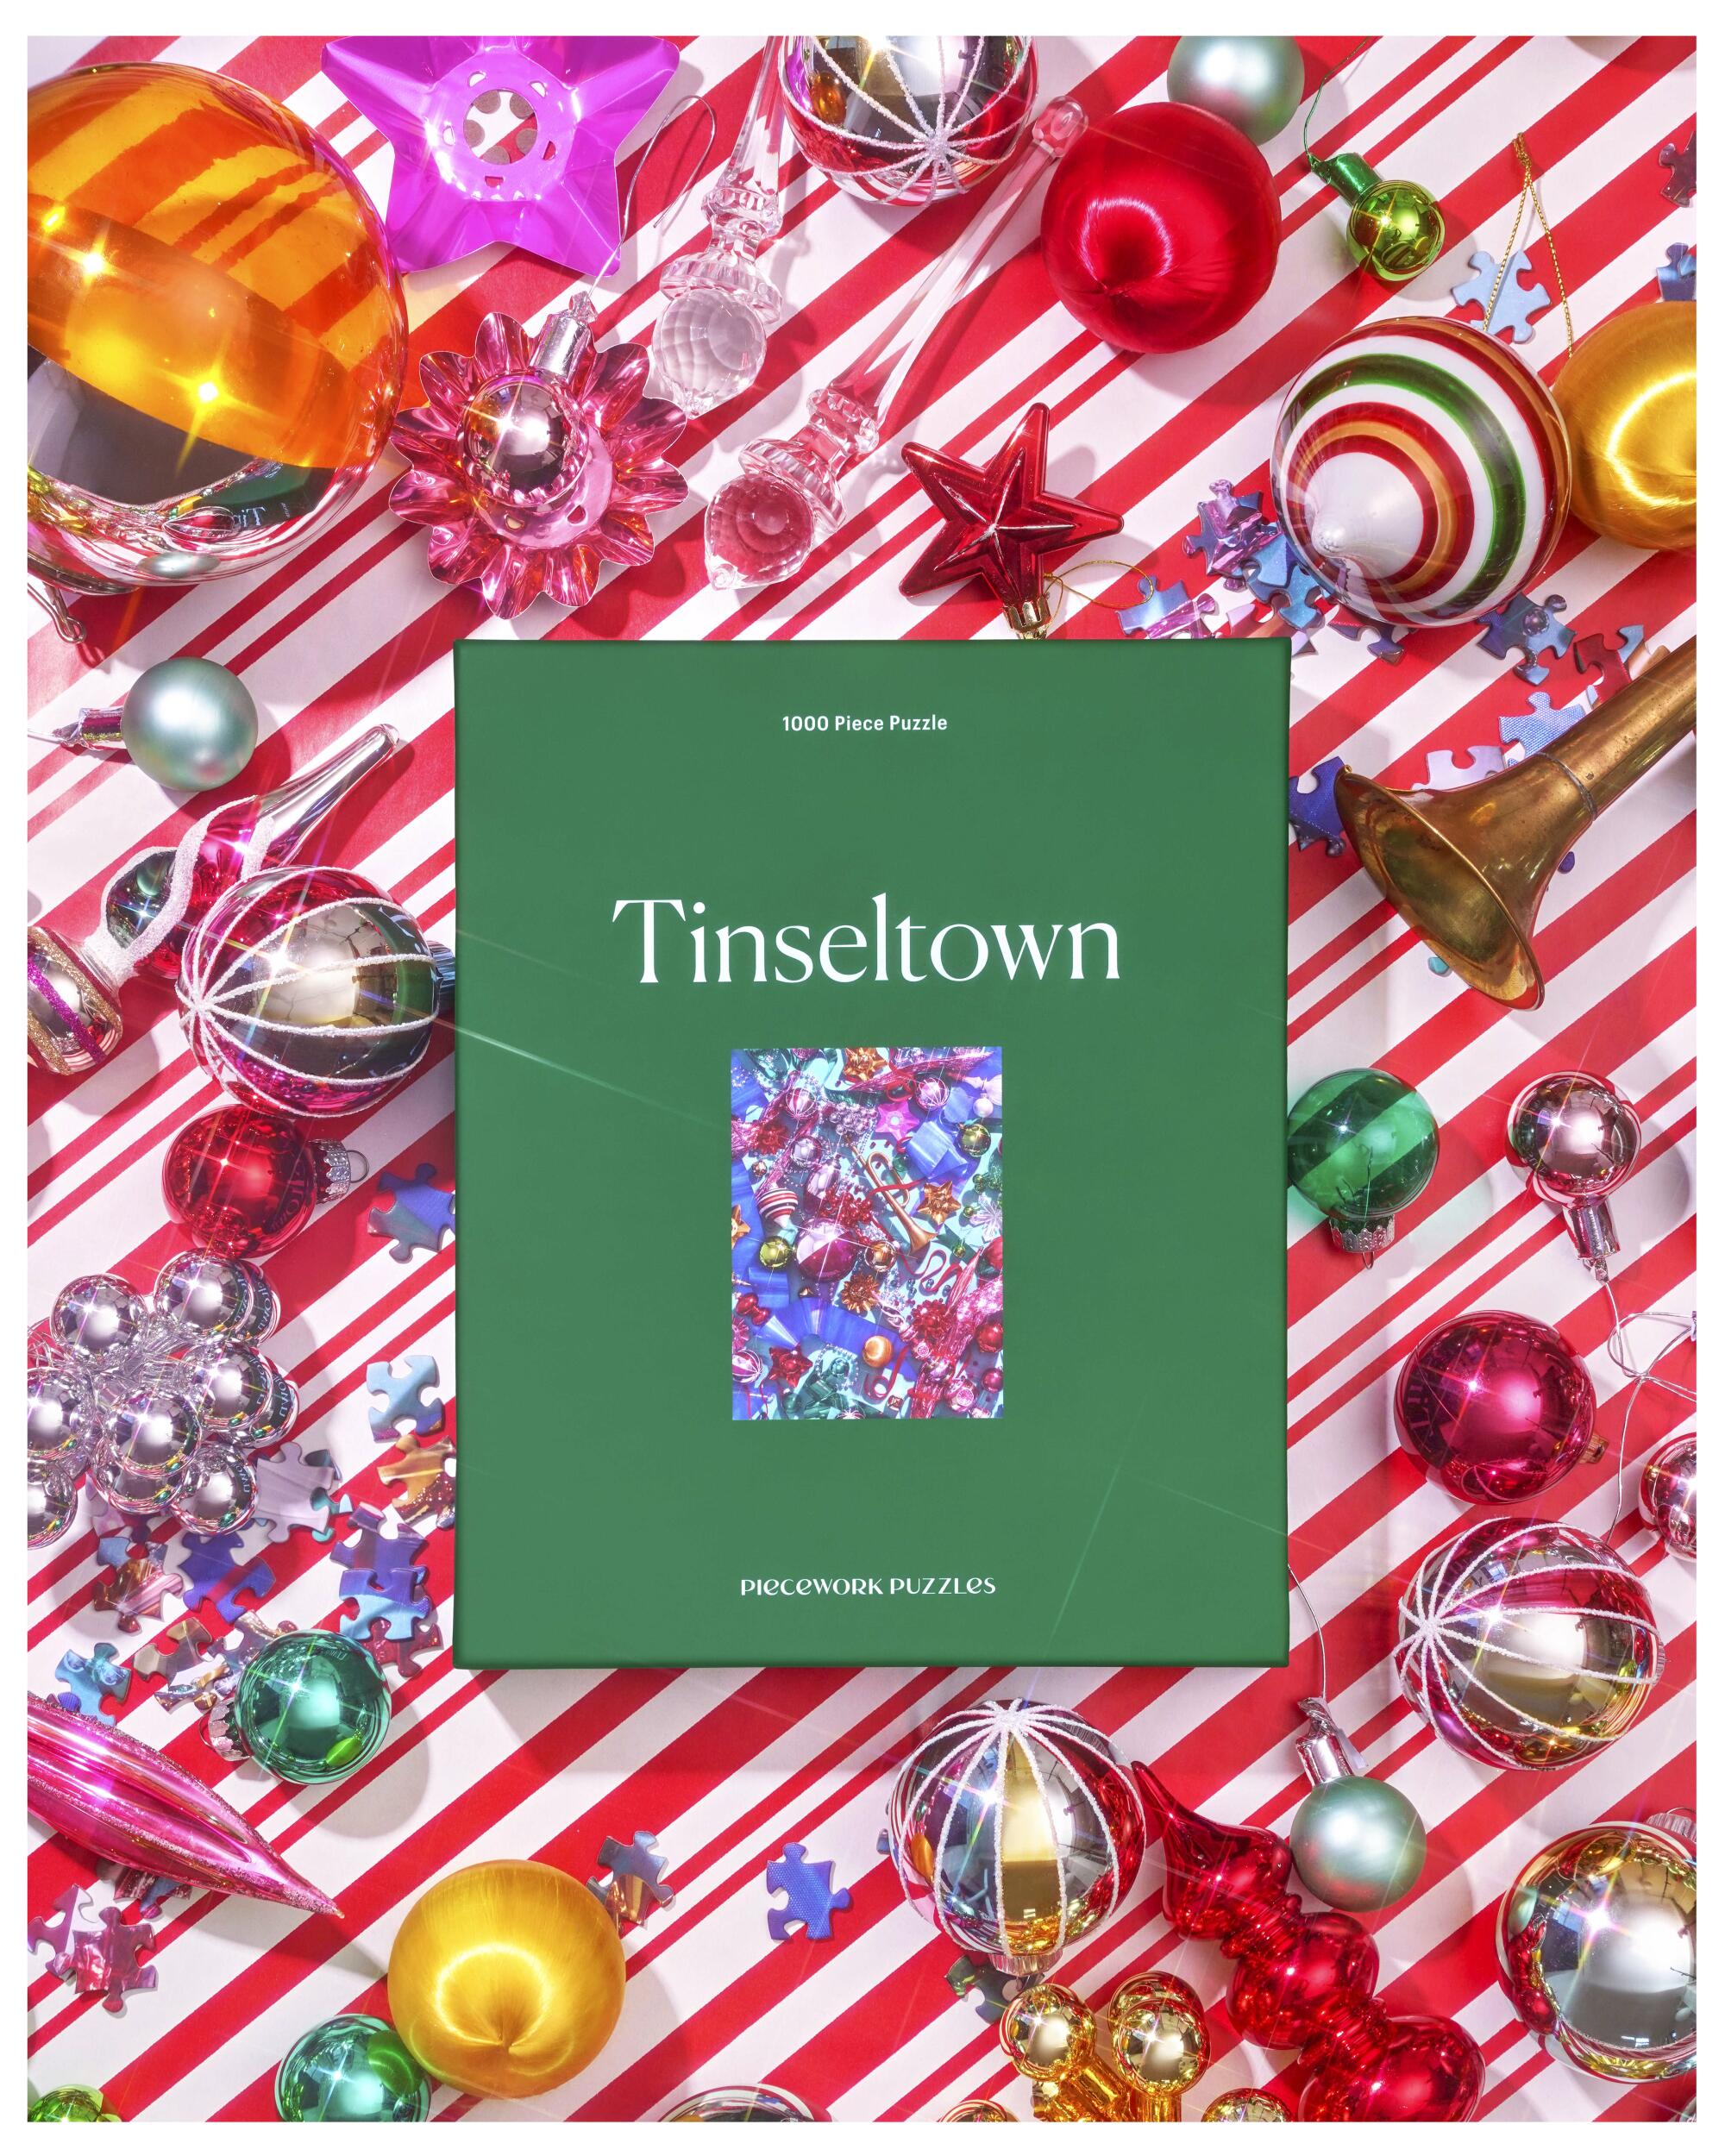 A tinseltown puzzle by Piecework Puzzle